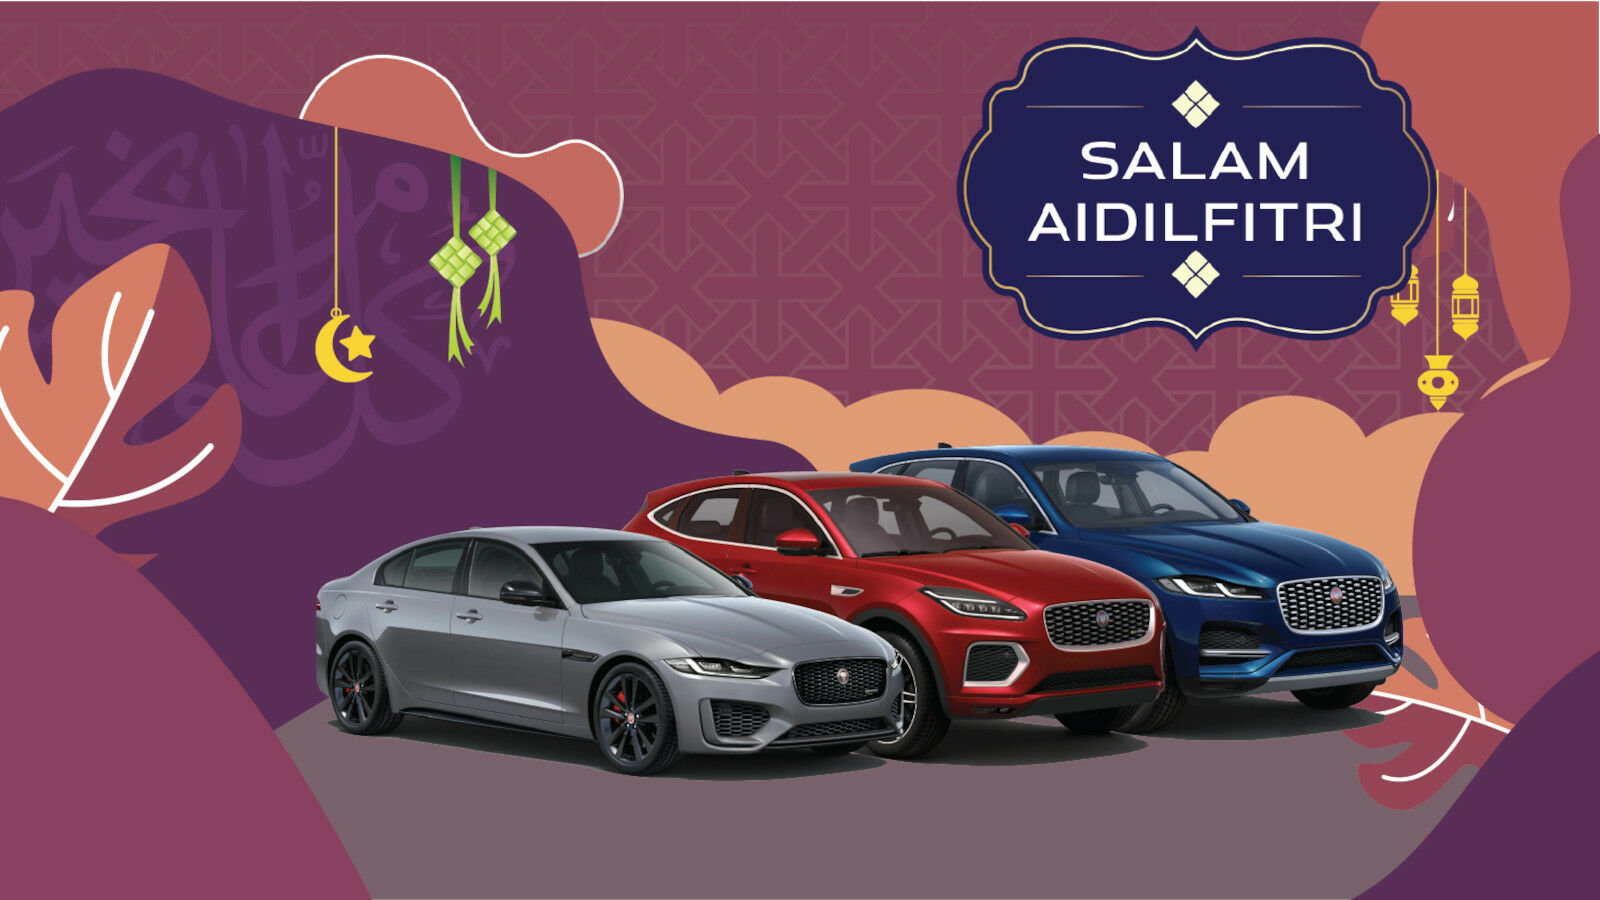 INDERA MOTORS WELCOMES RAMADHAN WITH FESTIVE OFFERS